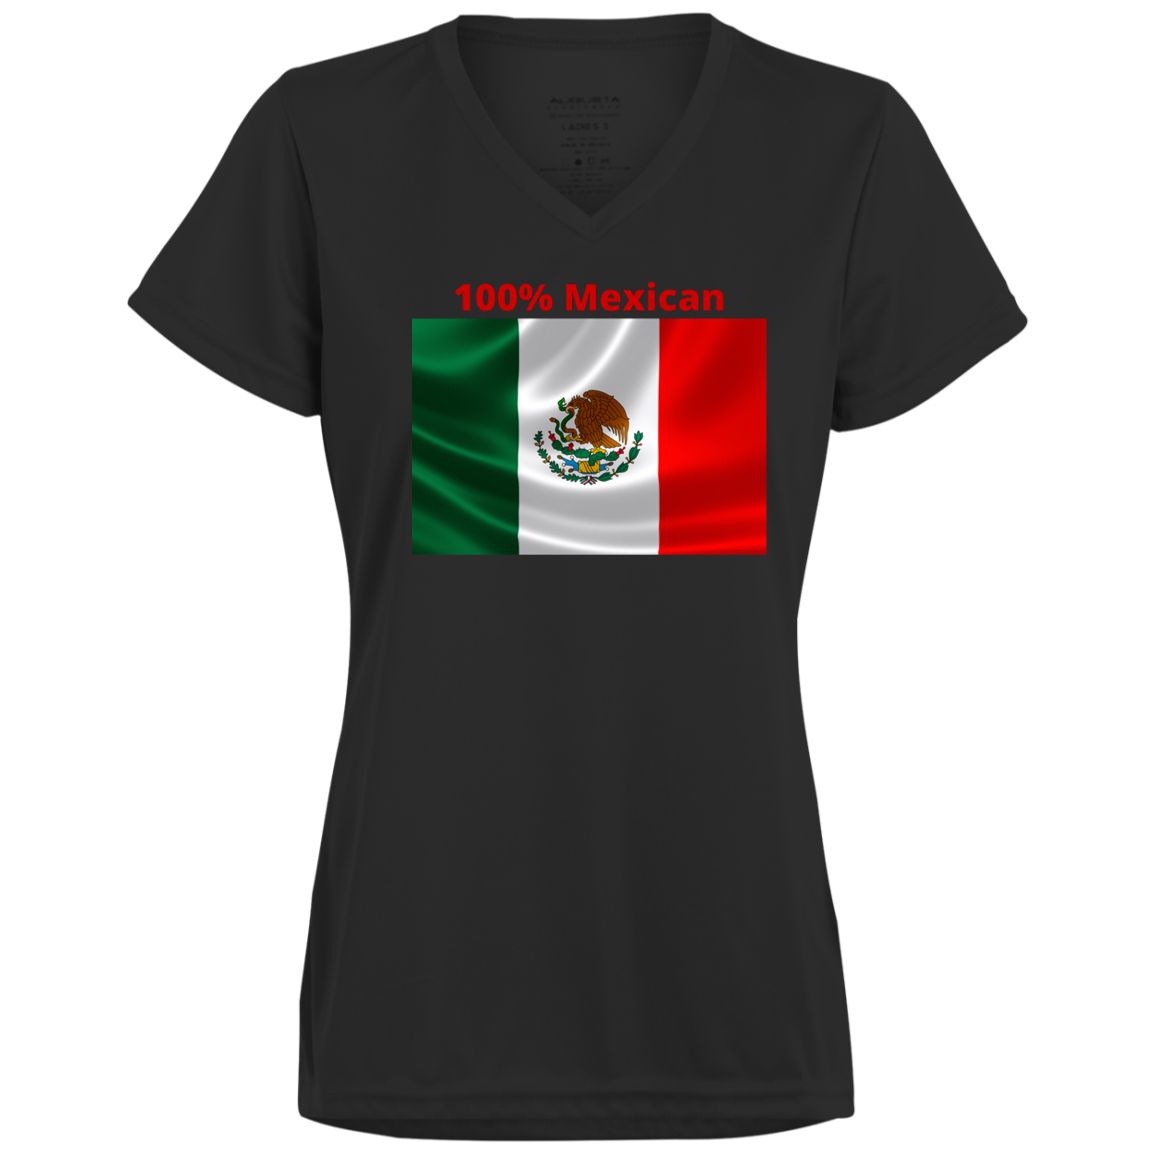 100% Mexican Ladies’ Moisture-Wicking V-Neck Tee